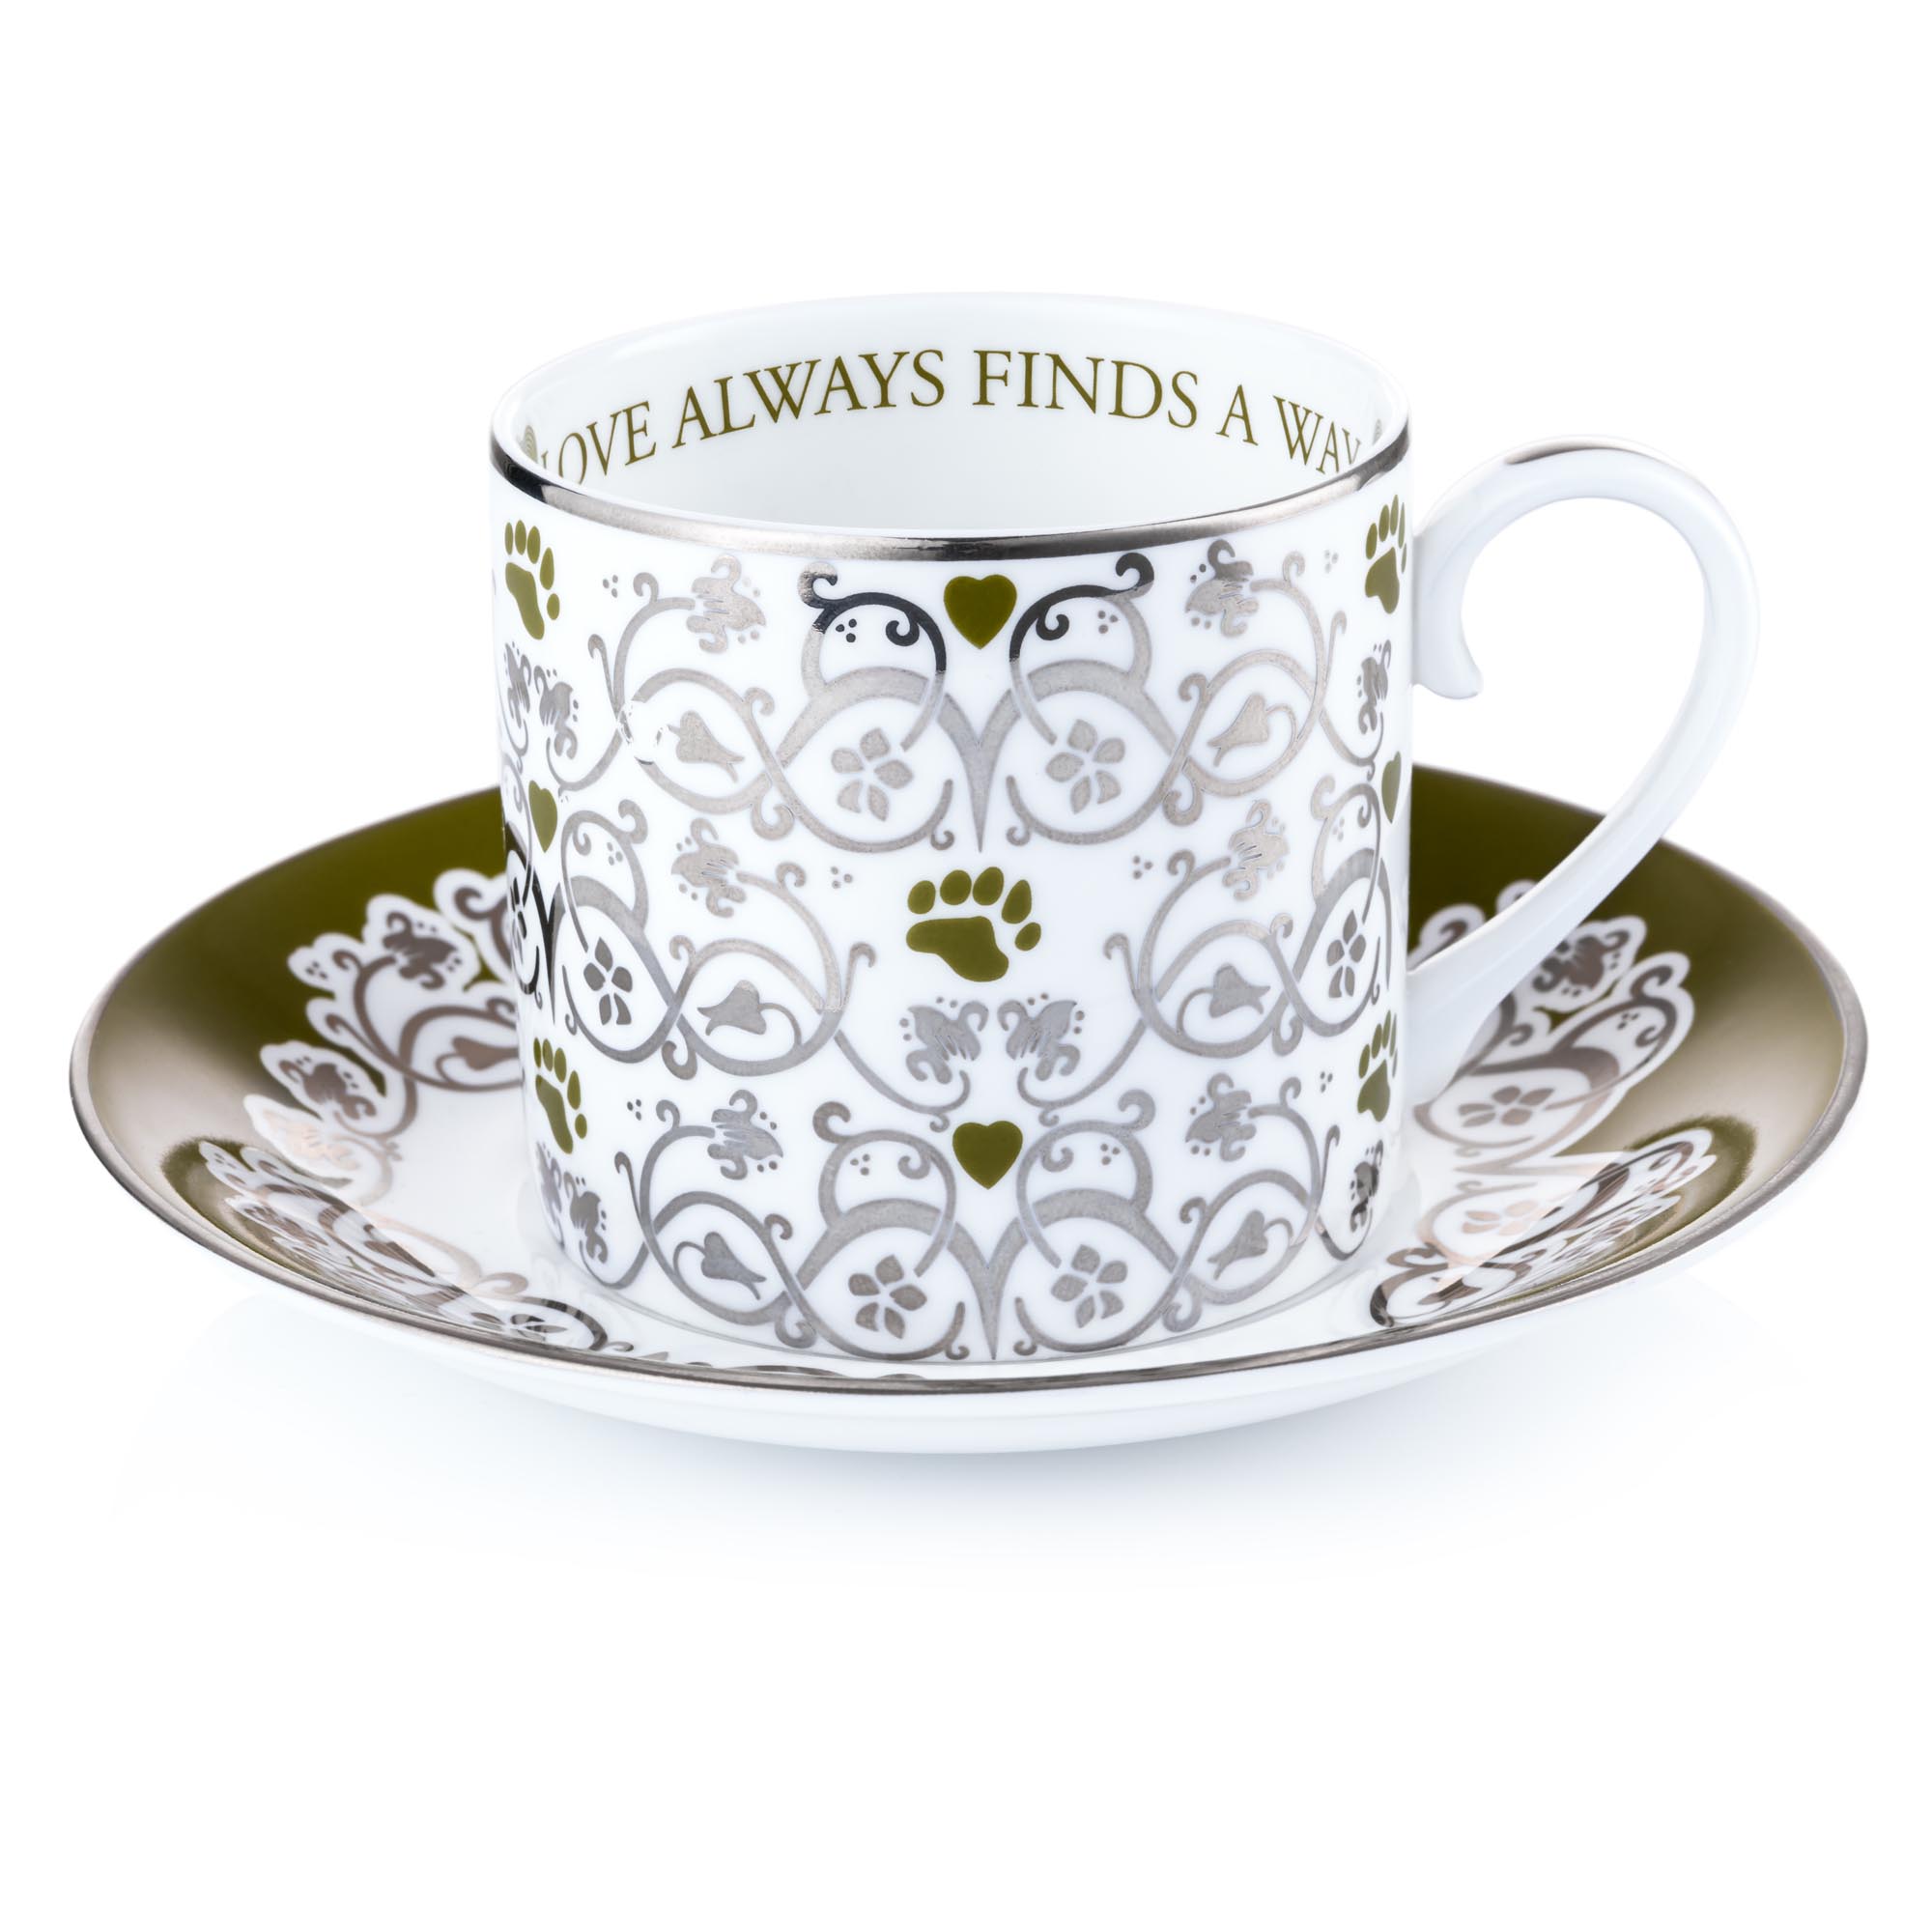 Charlie Bear Cup and Saucer - Love Always Finds a Way